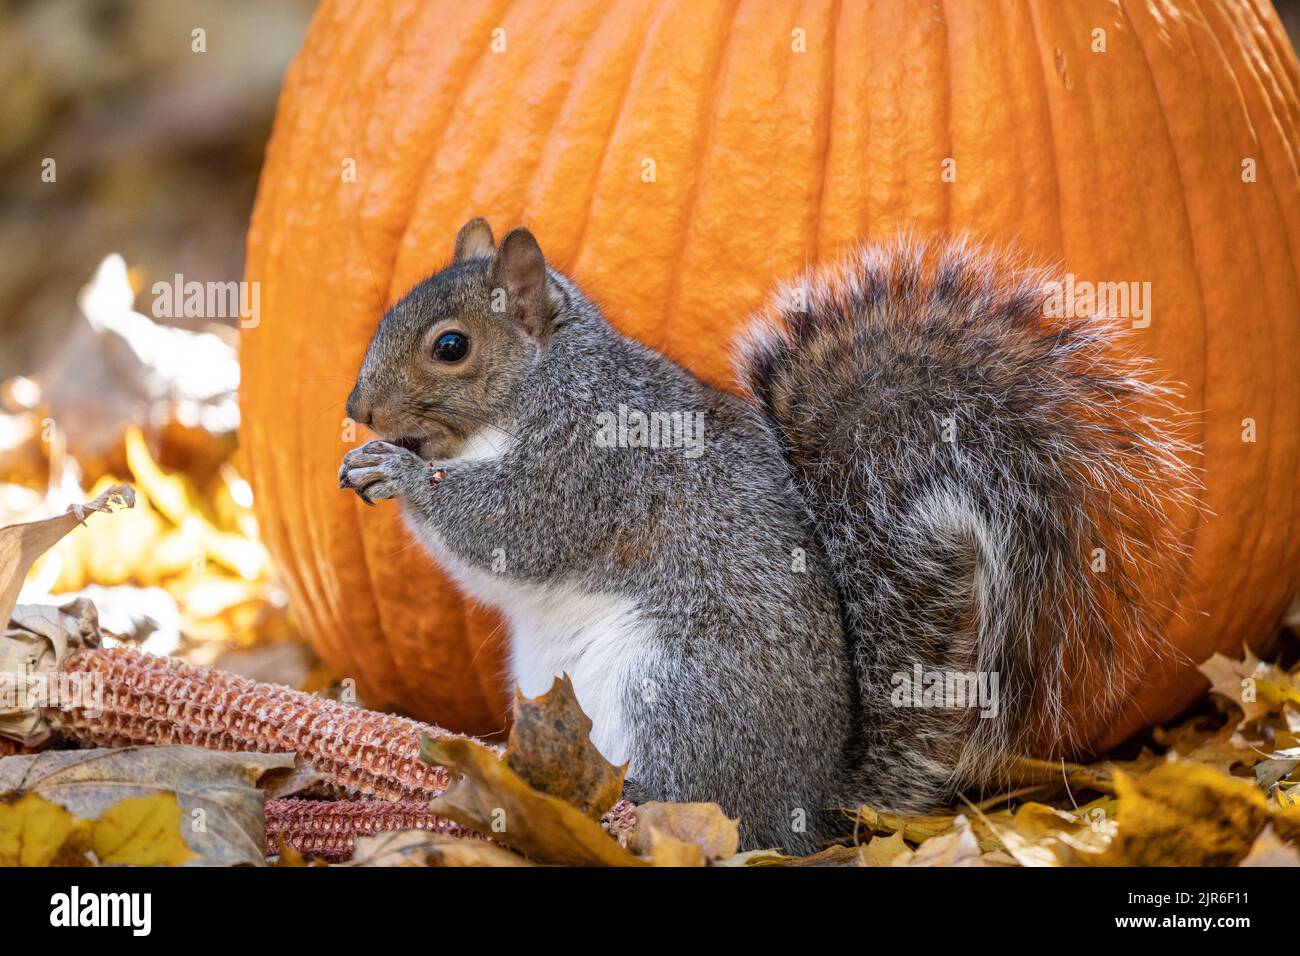 Cute Eastern Gray Squirrel eating corn and pumpkin seeds. Stock Photo